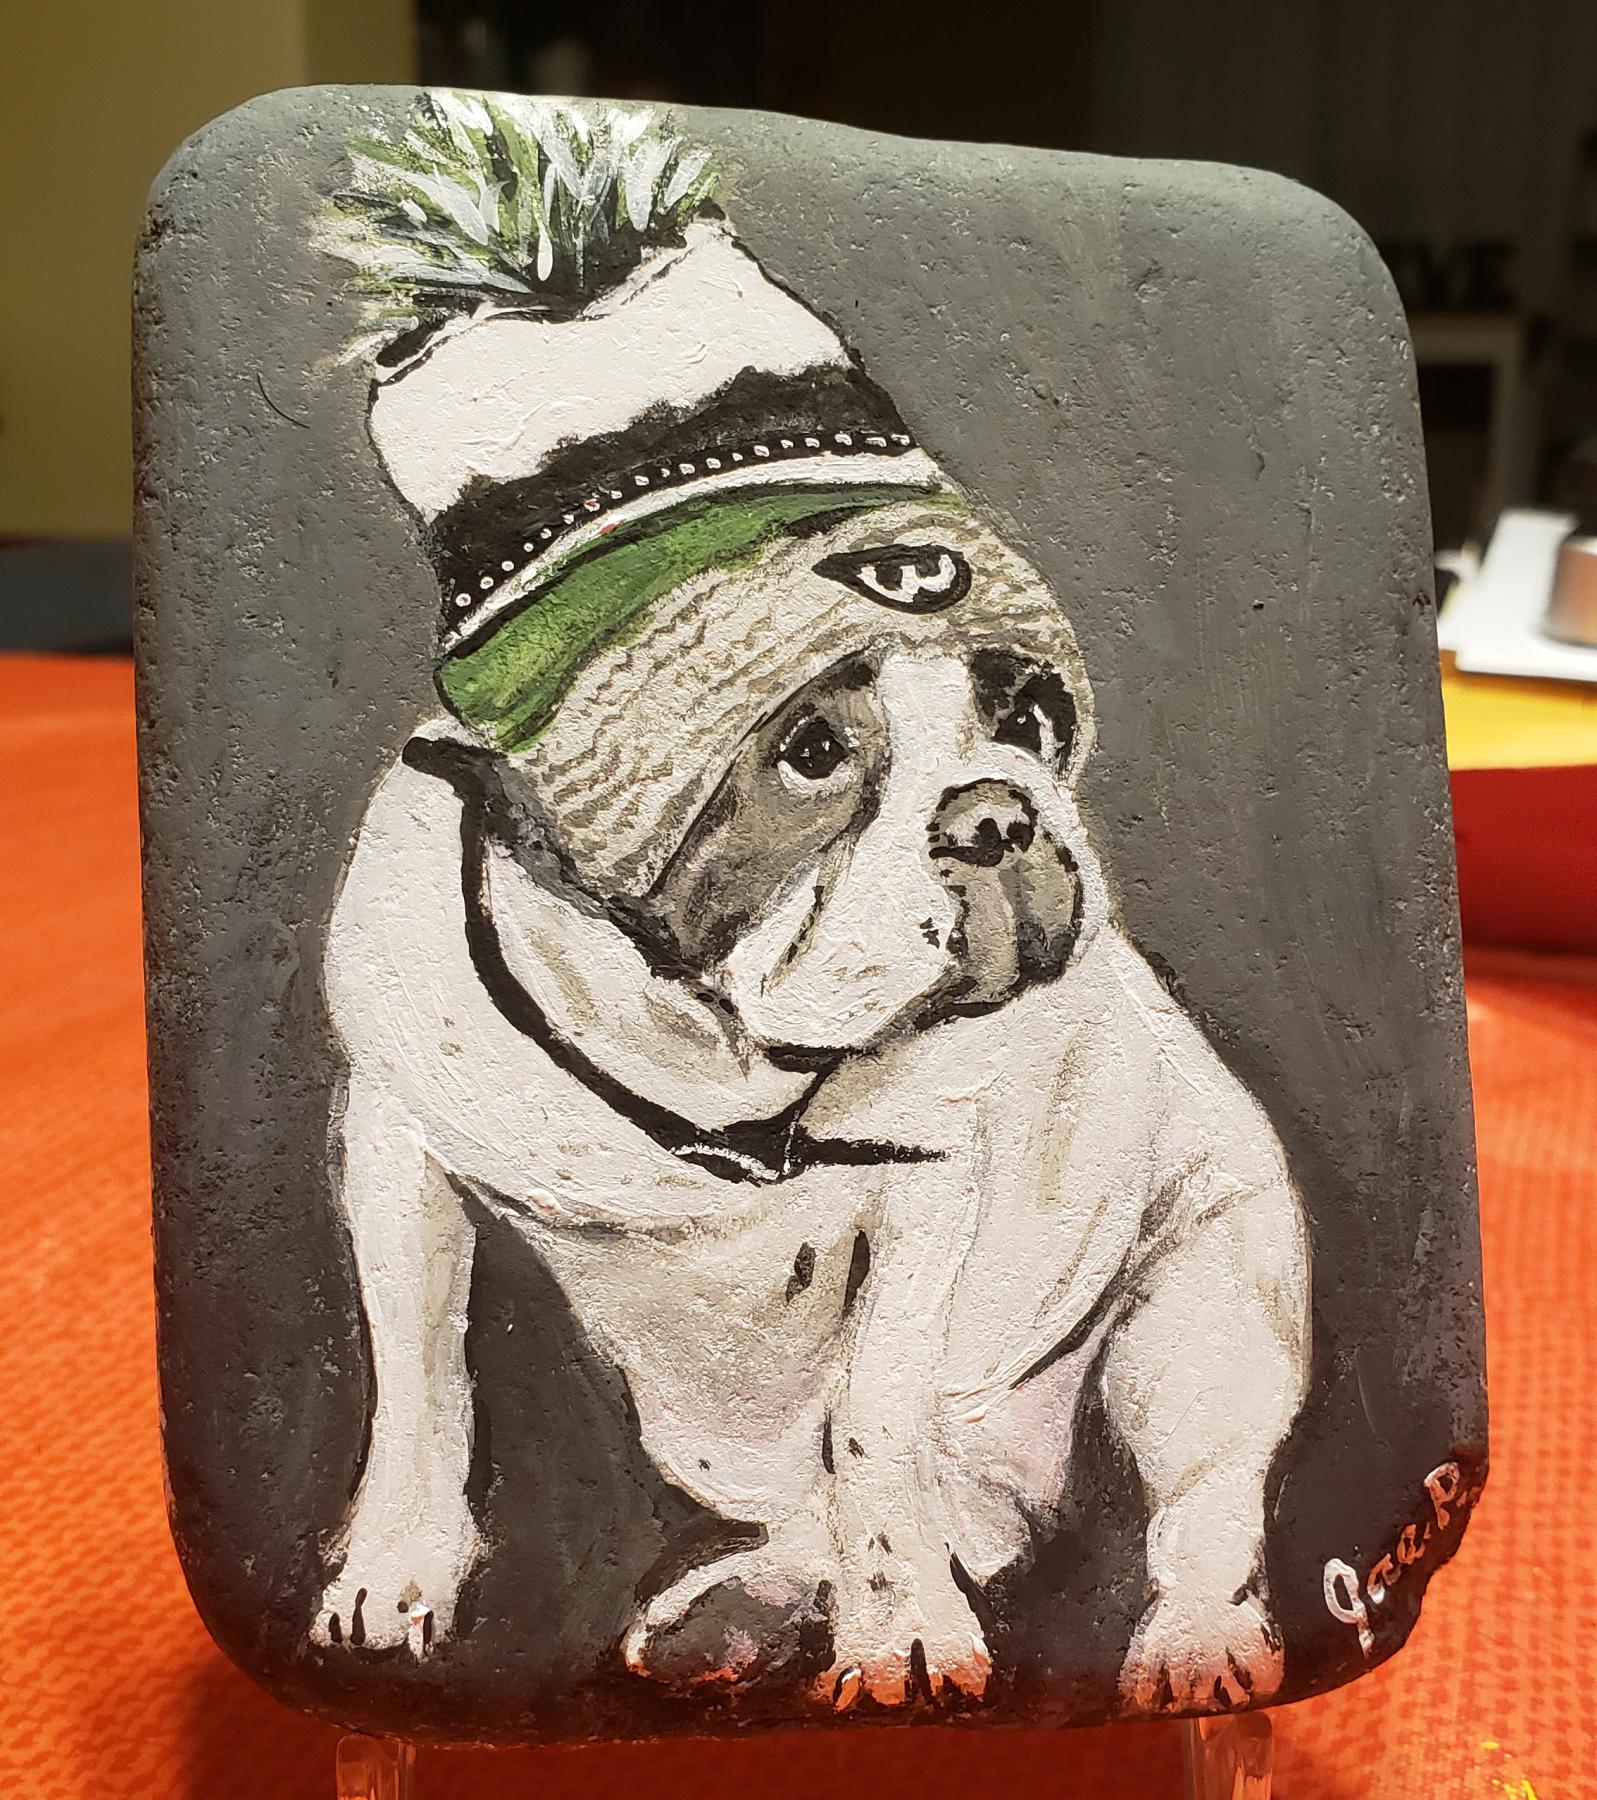 Painting of Donnie Wahlberg's white and grey bulldog that passed, wearing a winter hat.